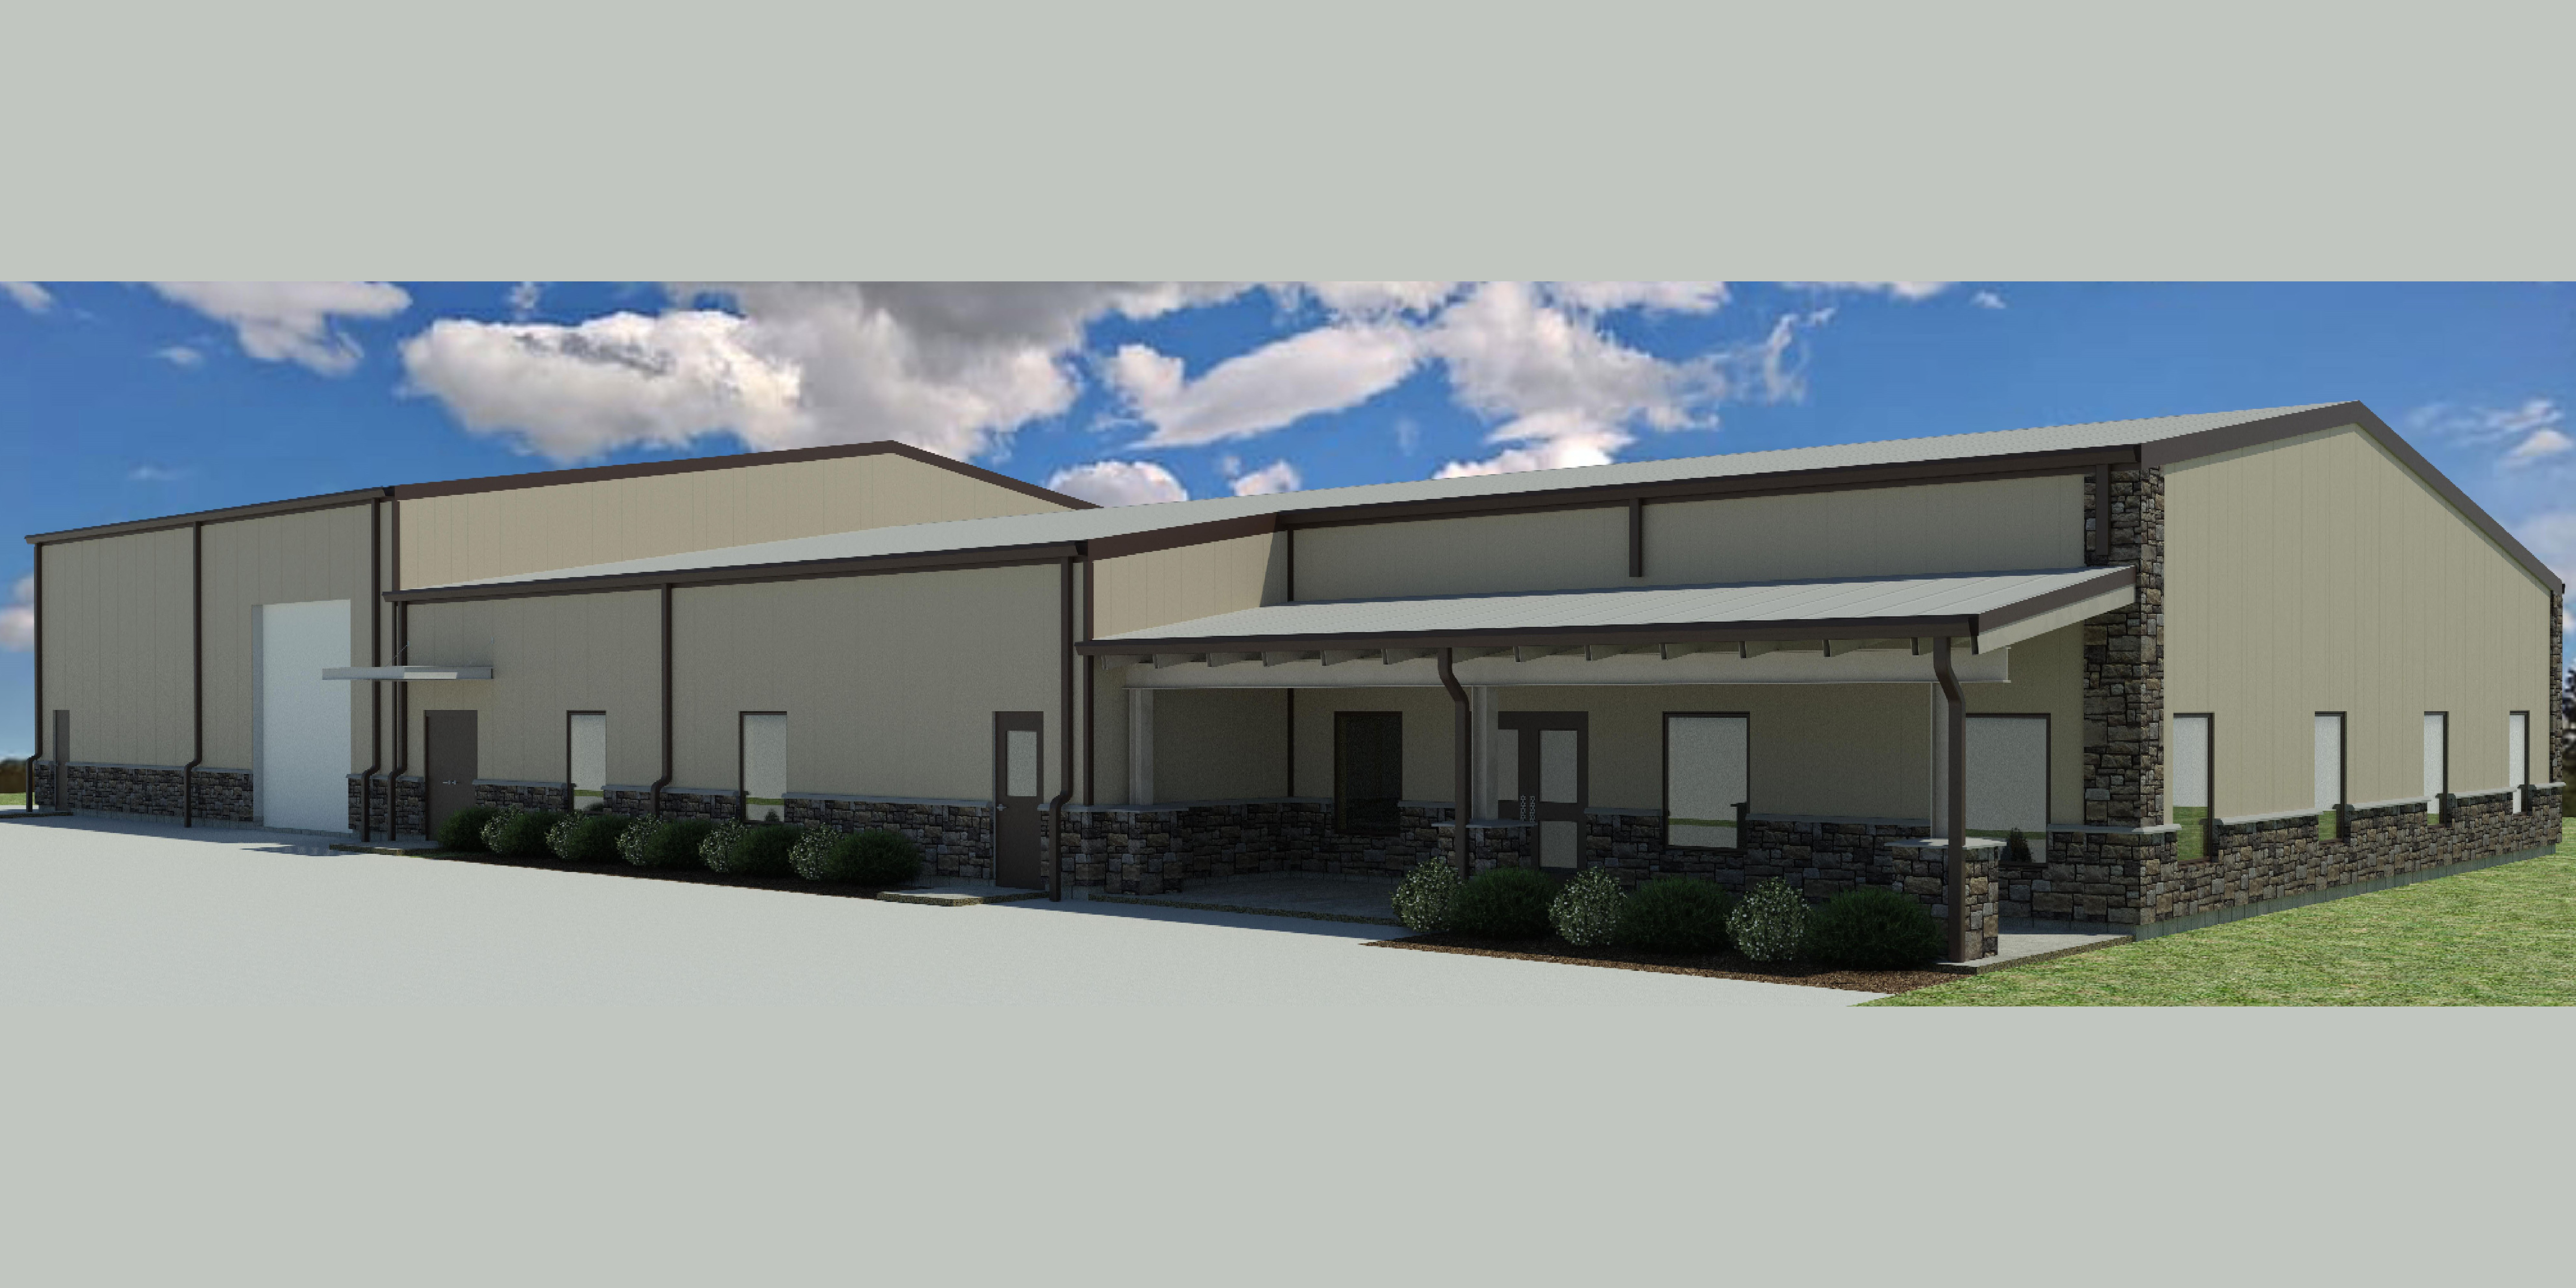 Rendering of the new Material Resources building in Kidron, OH.